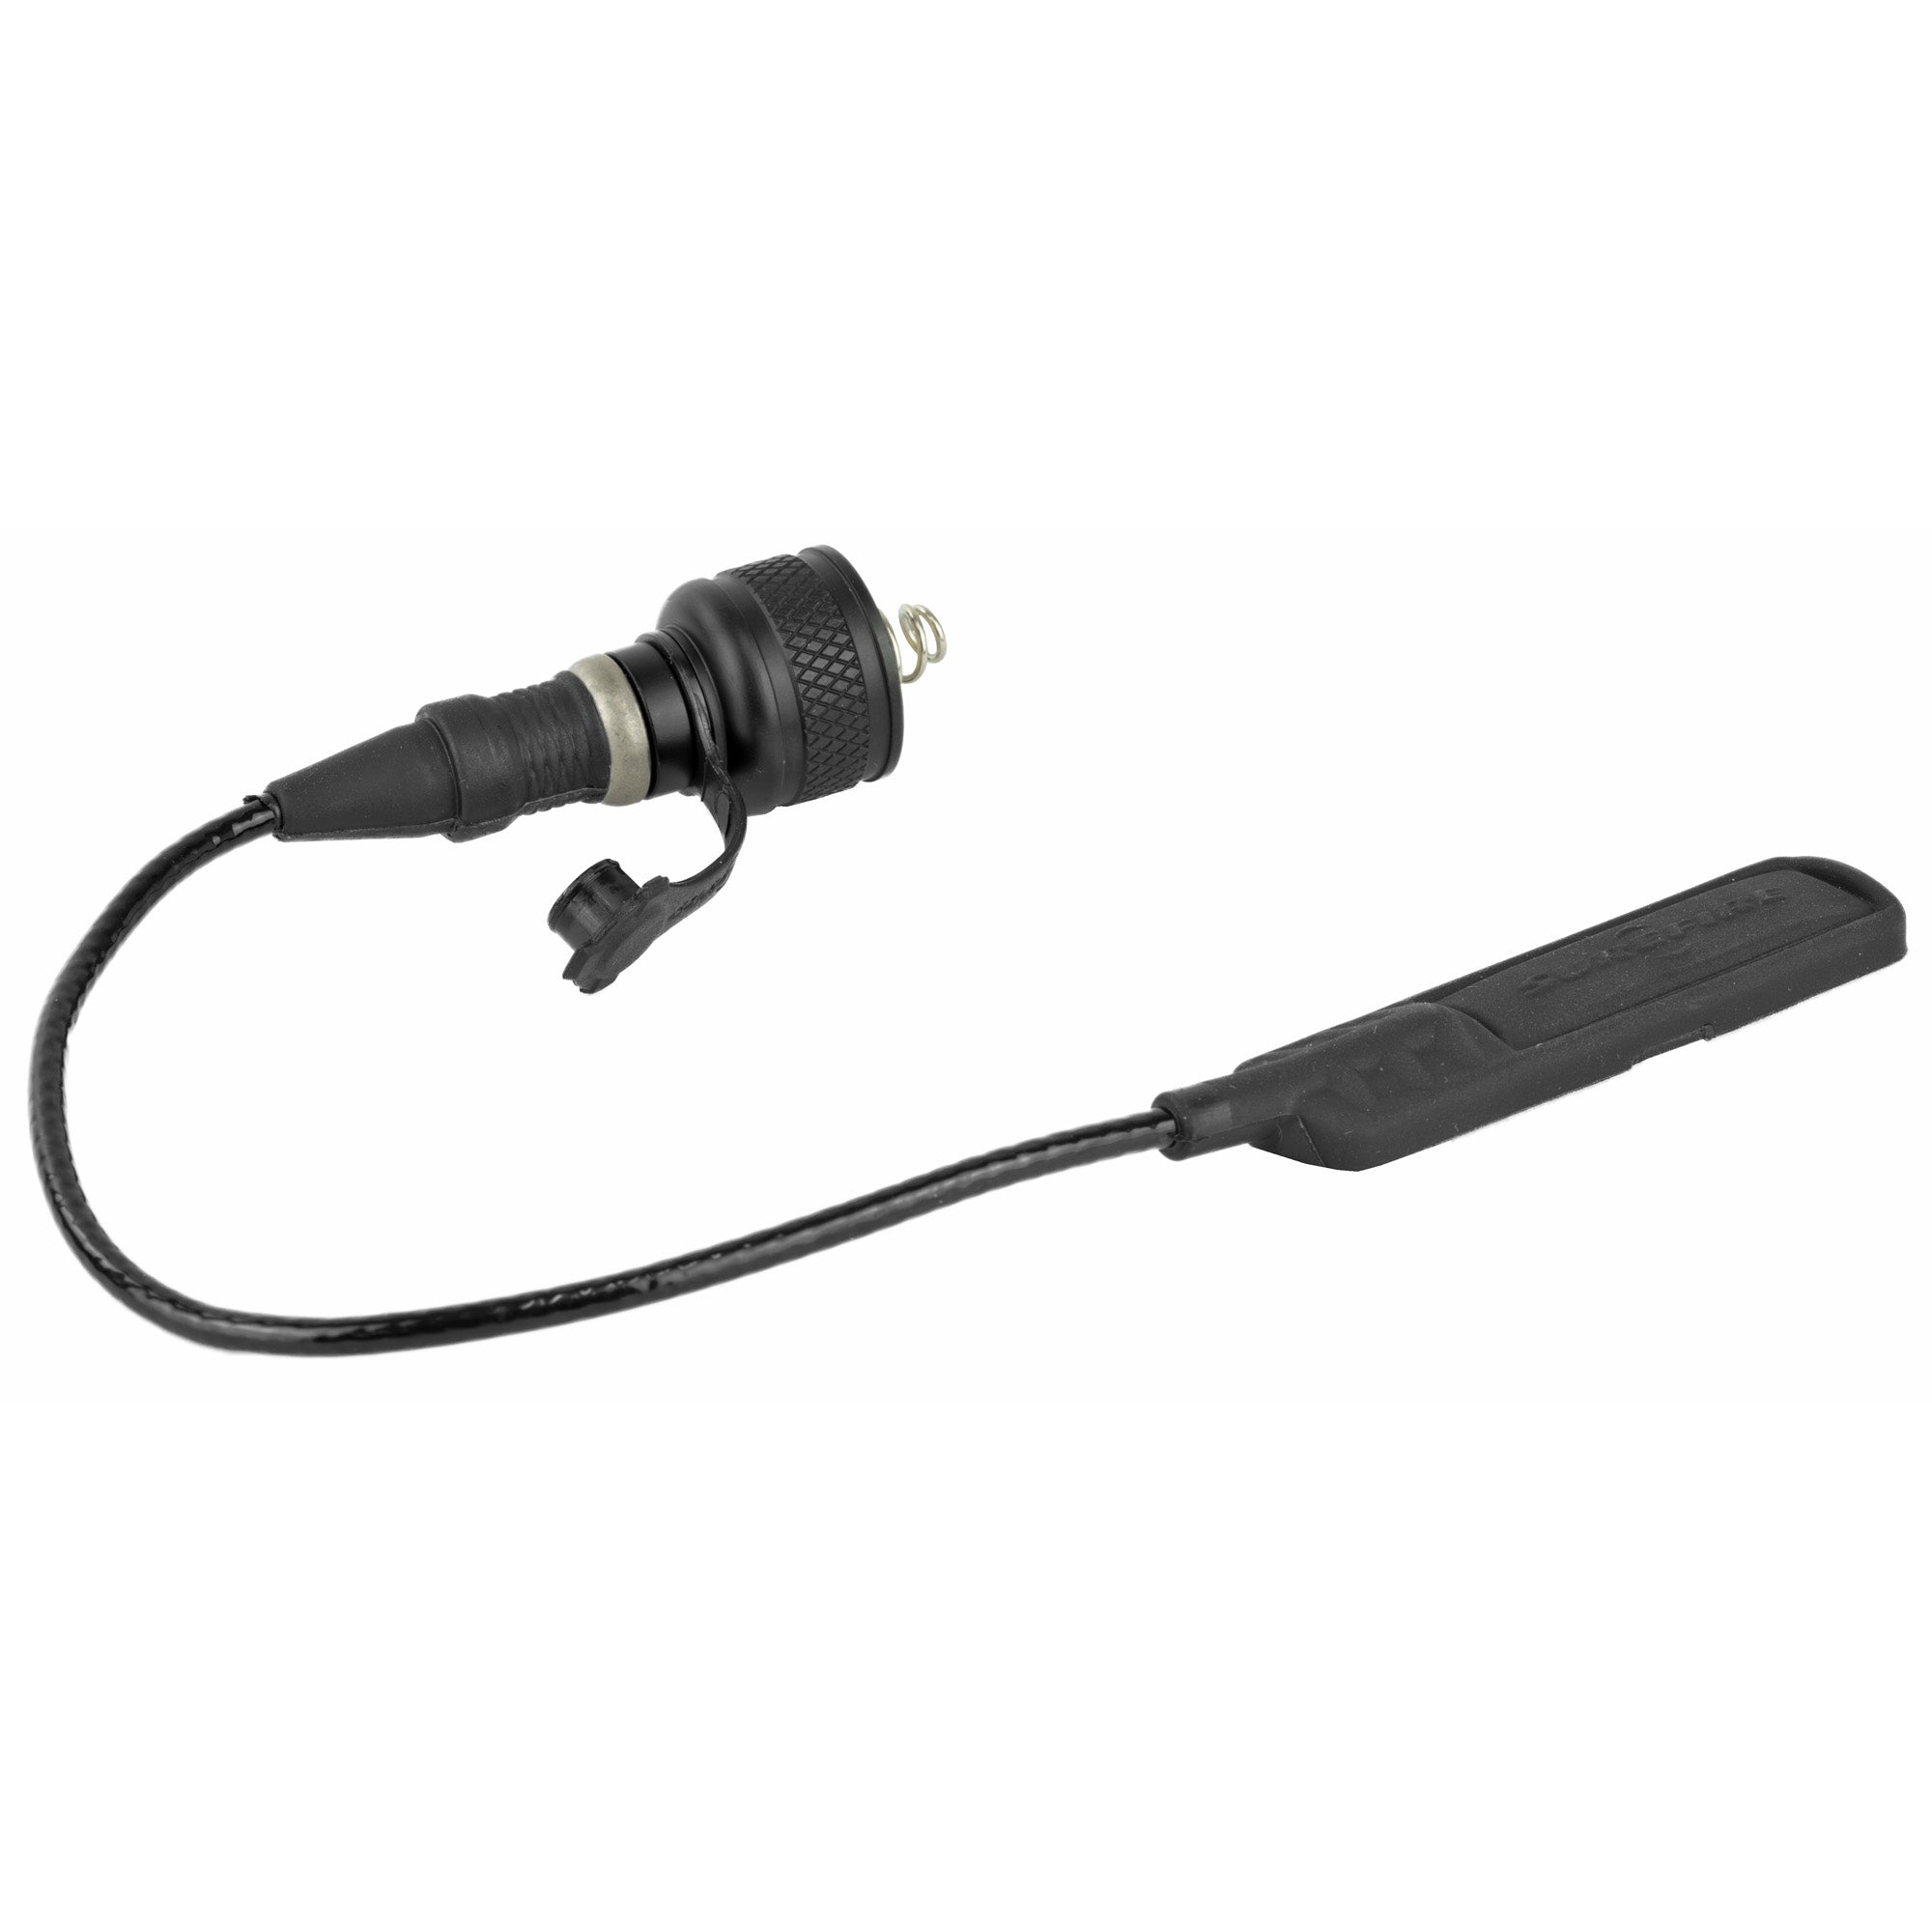 Surefire Remote Switch Assembly in Black for Scout Lights, featuring a 7-inch cable and weatherproof, O-ring sealed construction.